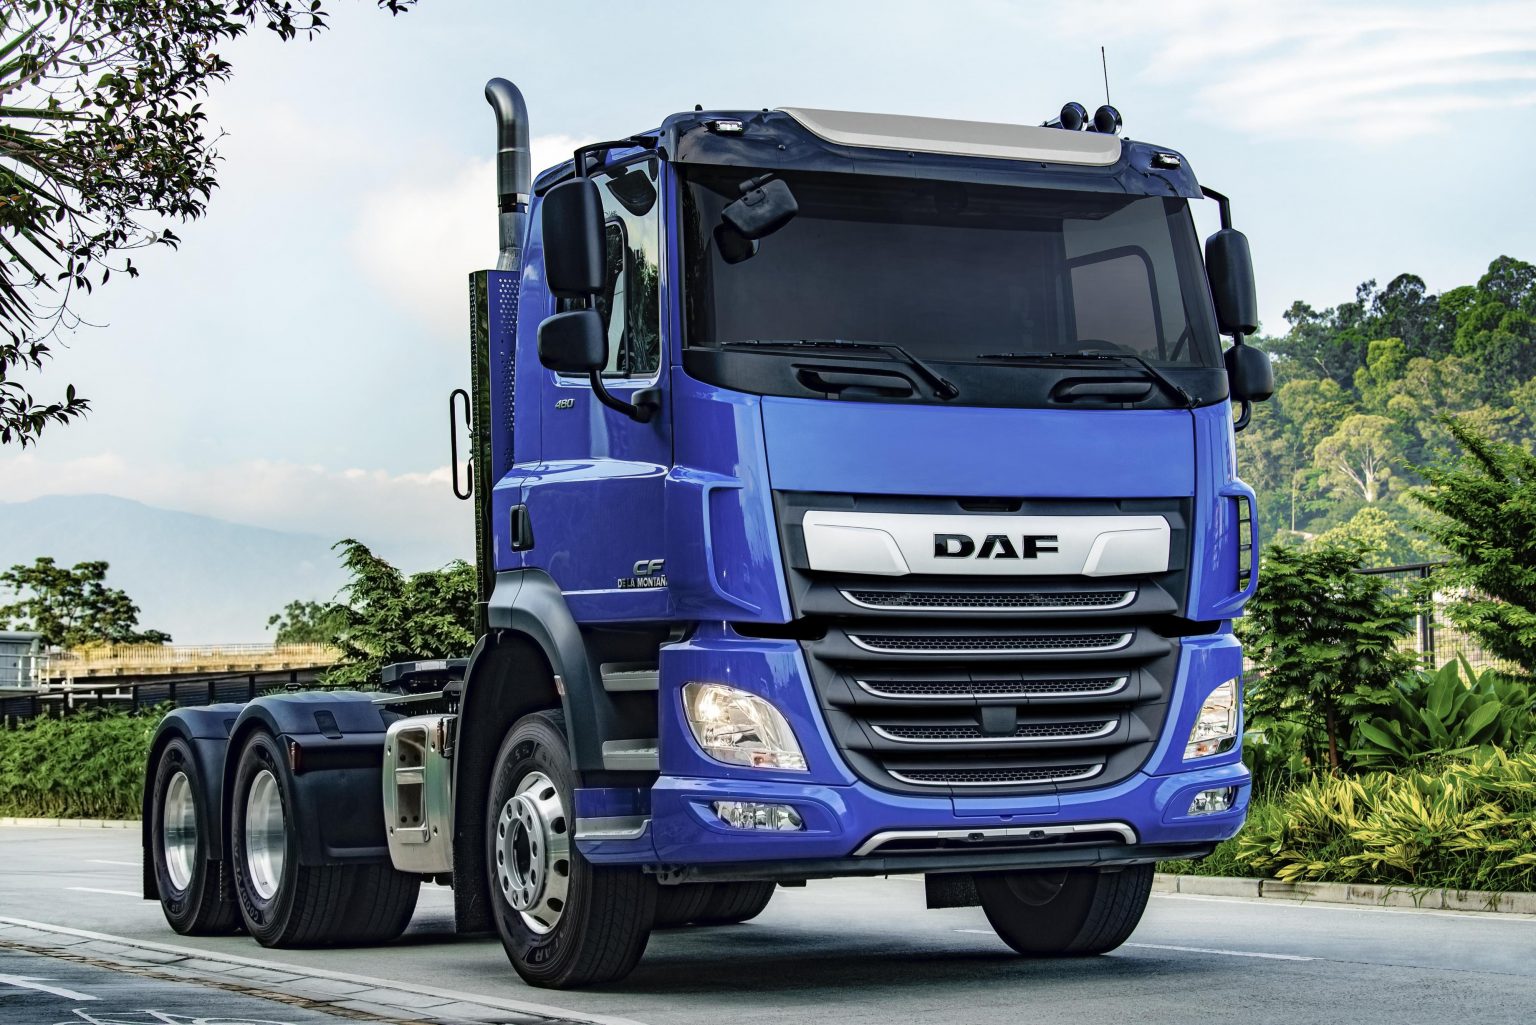 DAF To Ship 200 Heavy-Duty Trucks To Colombia